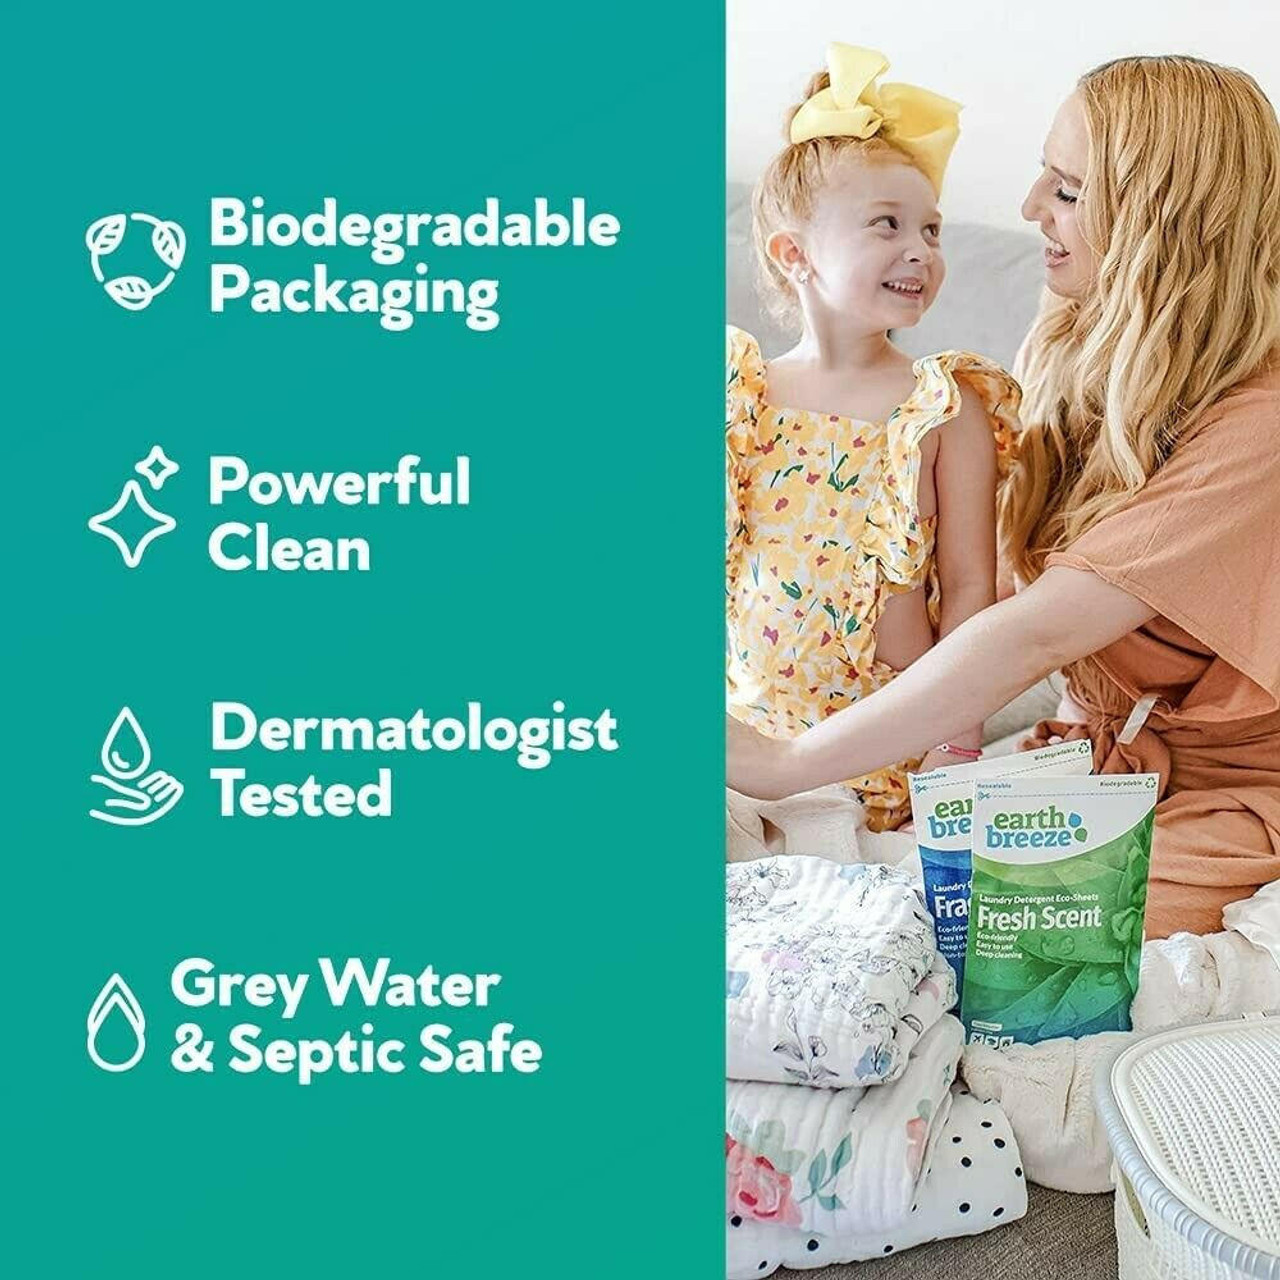 https://cdn11.bigcommerce.com/s-zrh8tkpr8d/images/stencil/1280x1280/products/9919/35240/earth-breeze-laundry-detergent-or-liquidless-fresh-scent-or-30-sheets-60-loads__48711.1665677297.jpg?c=2&imbypass=on